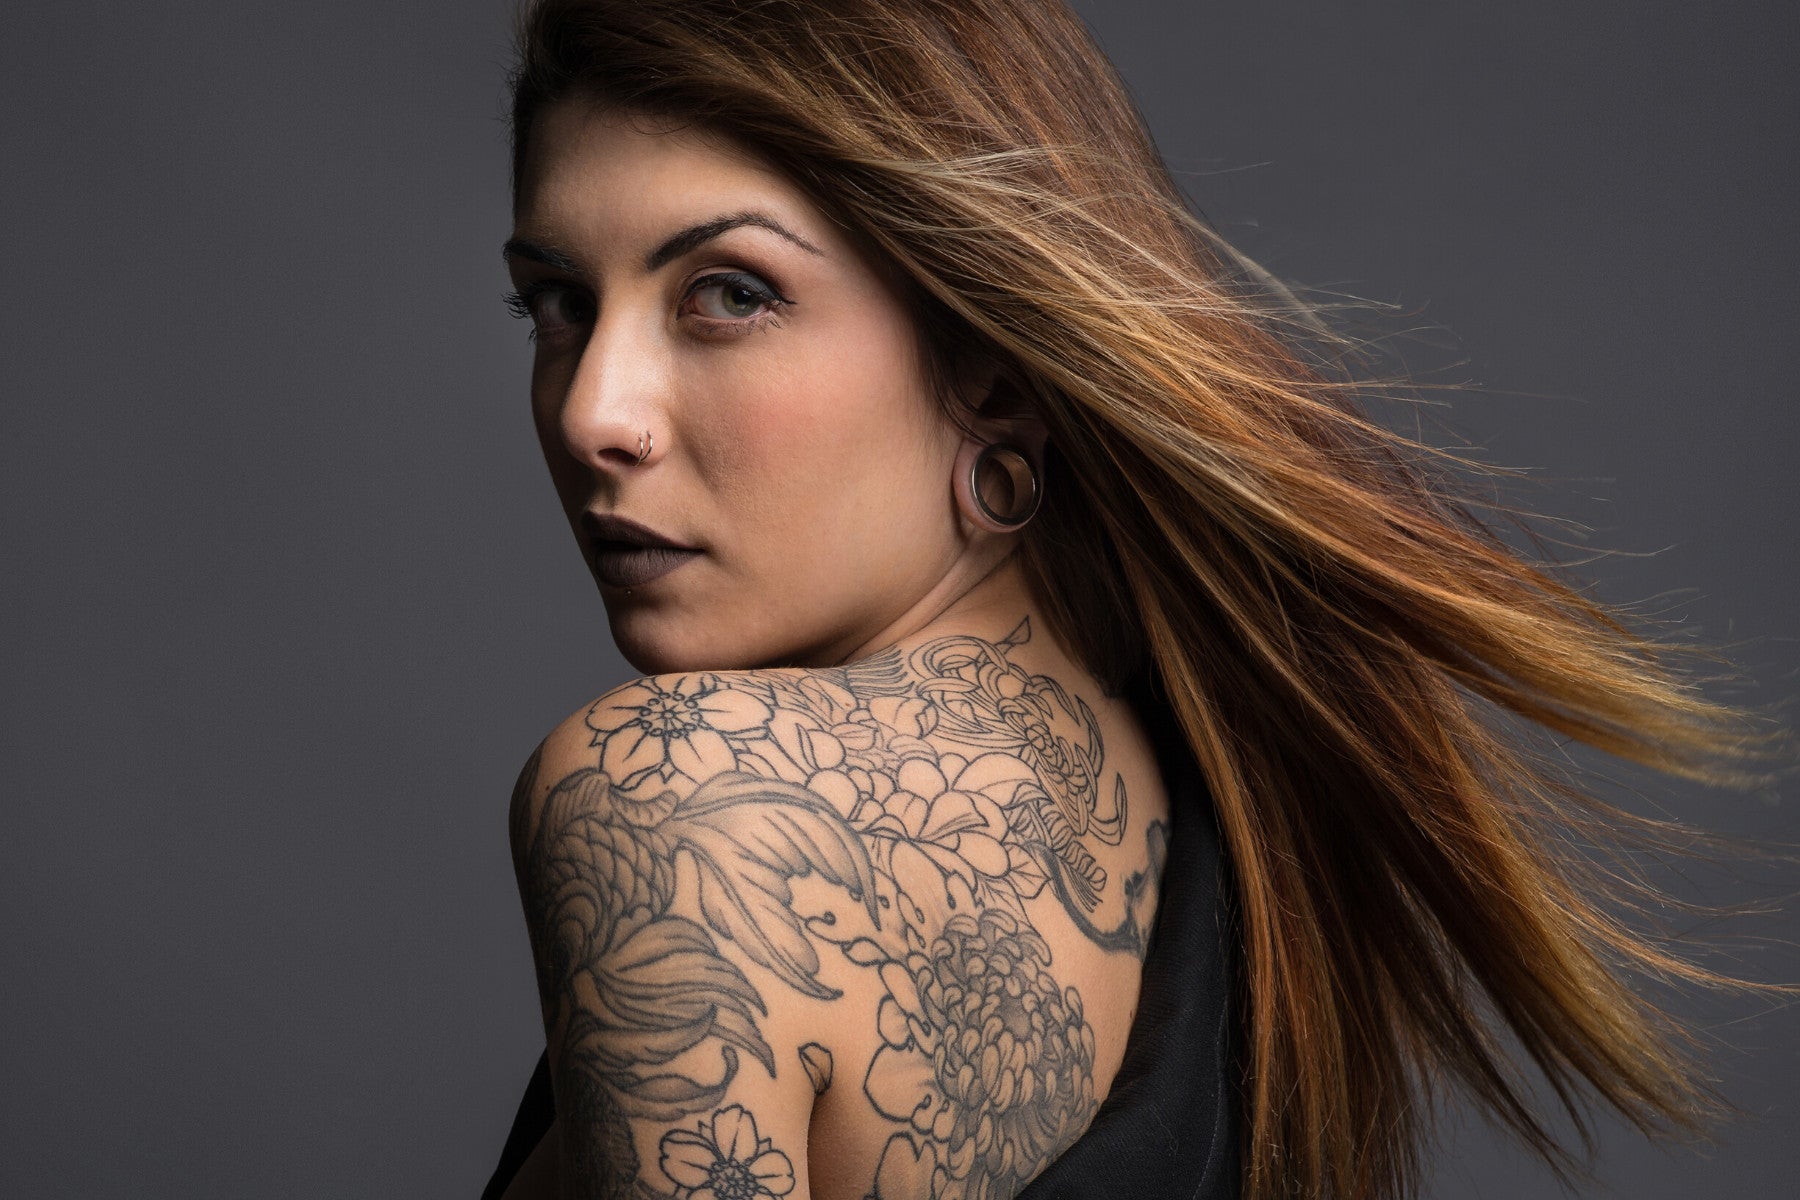 How to find a tattoo artist and get exactly the ink you want